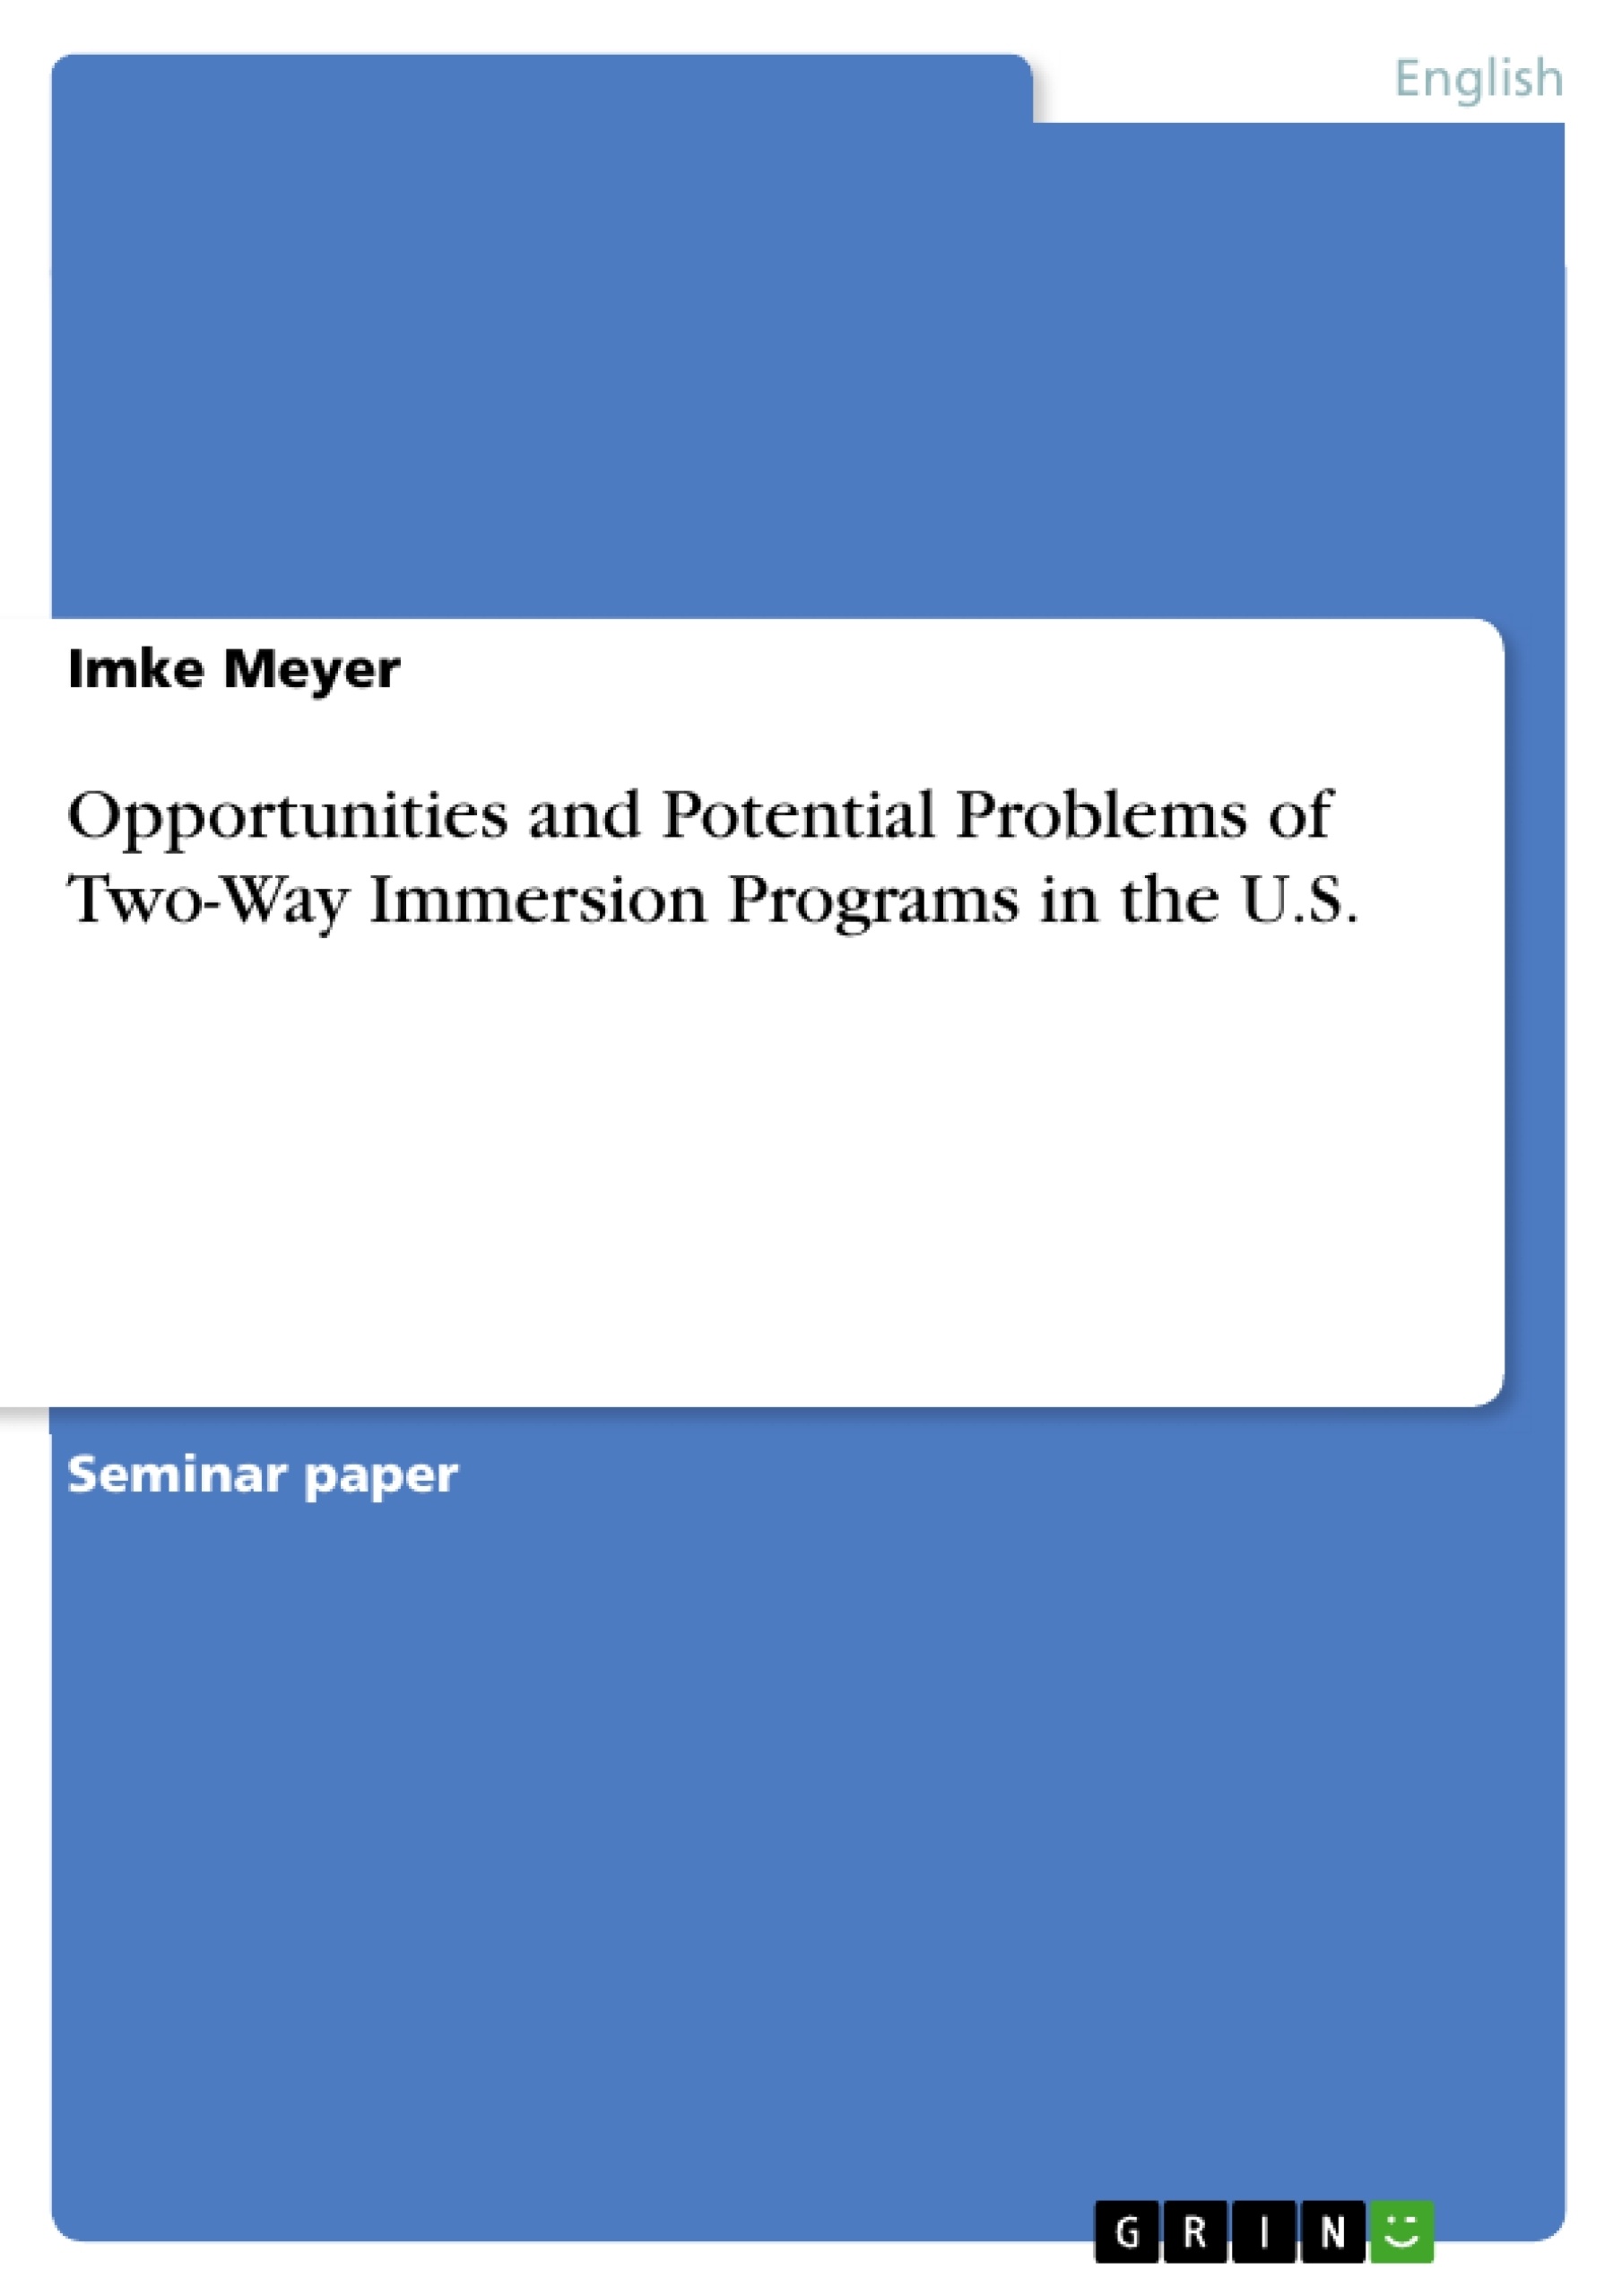 Título: Opportunities and Potential Problems of Two-Way Immersion Programs in the U.S.